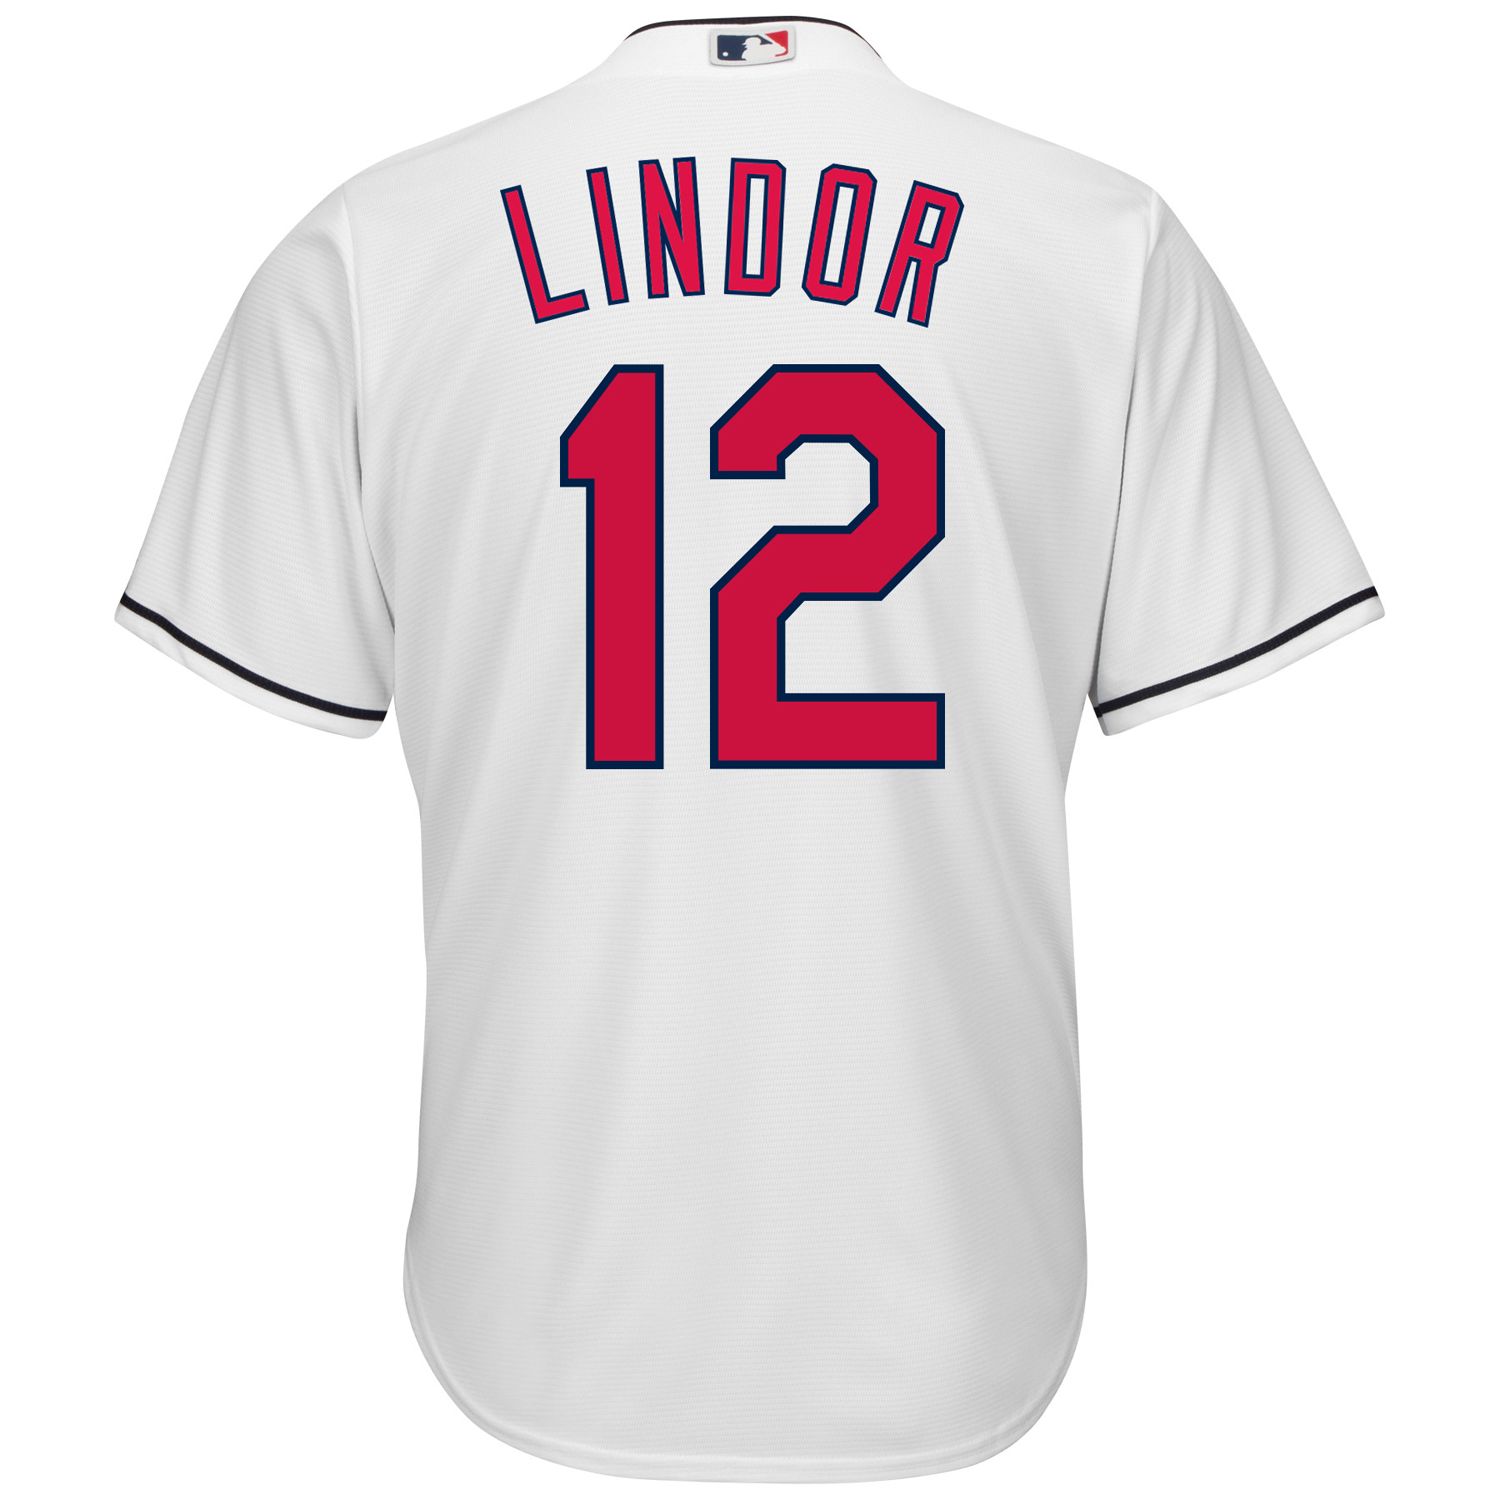 cleveland indians replica jersey